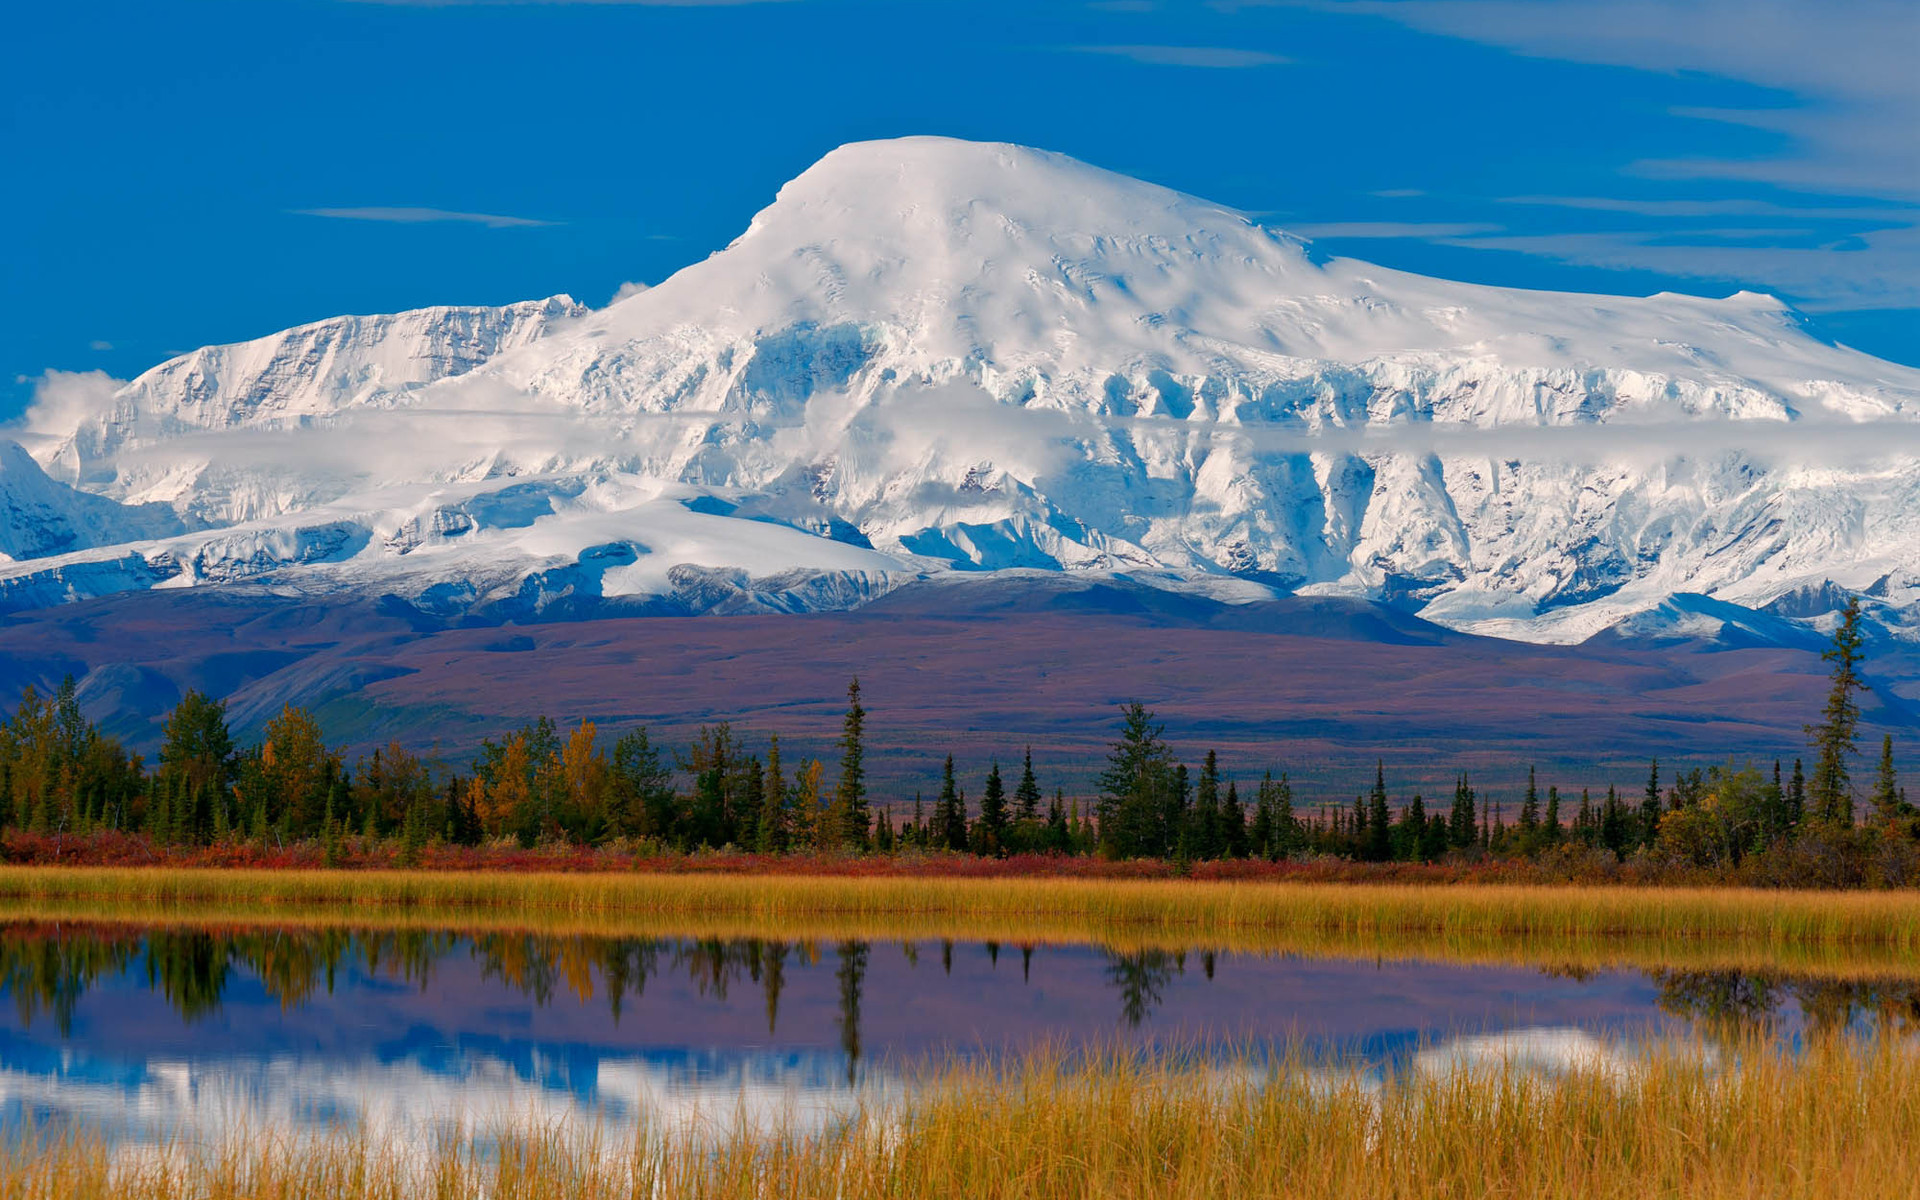 Wrangell St Elias National Park In Alaska Seen From The Nabesna Road